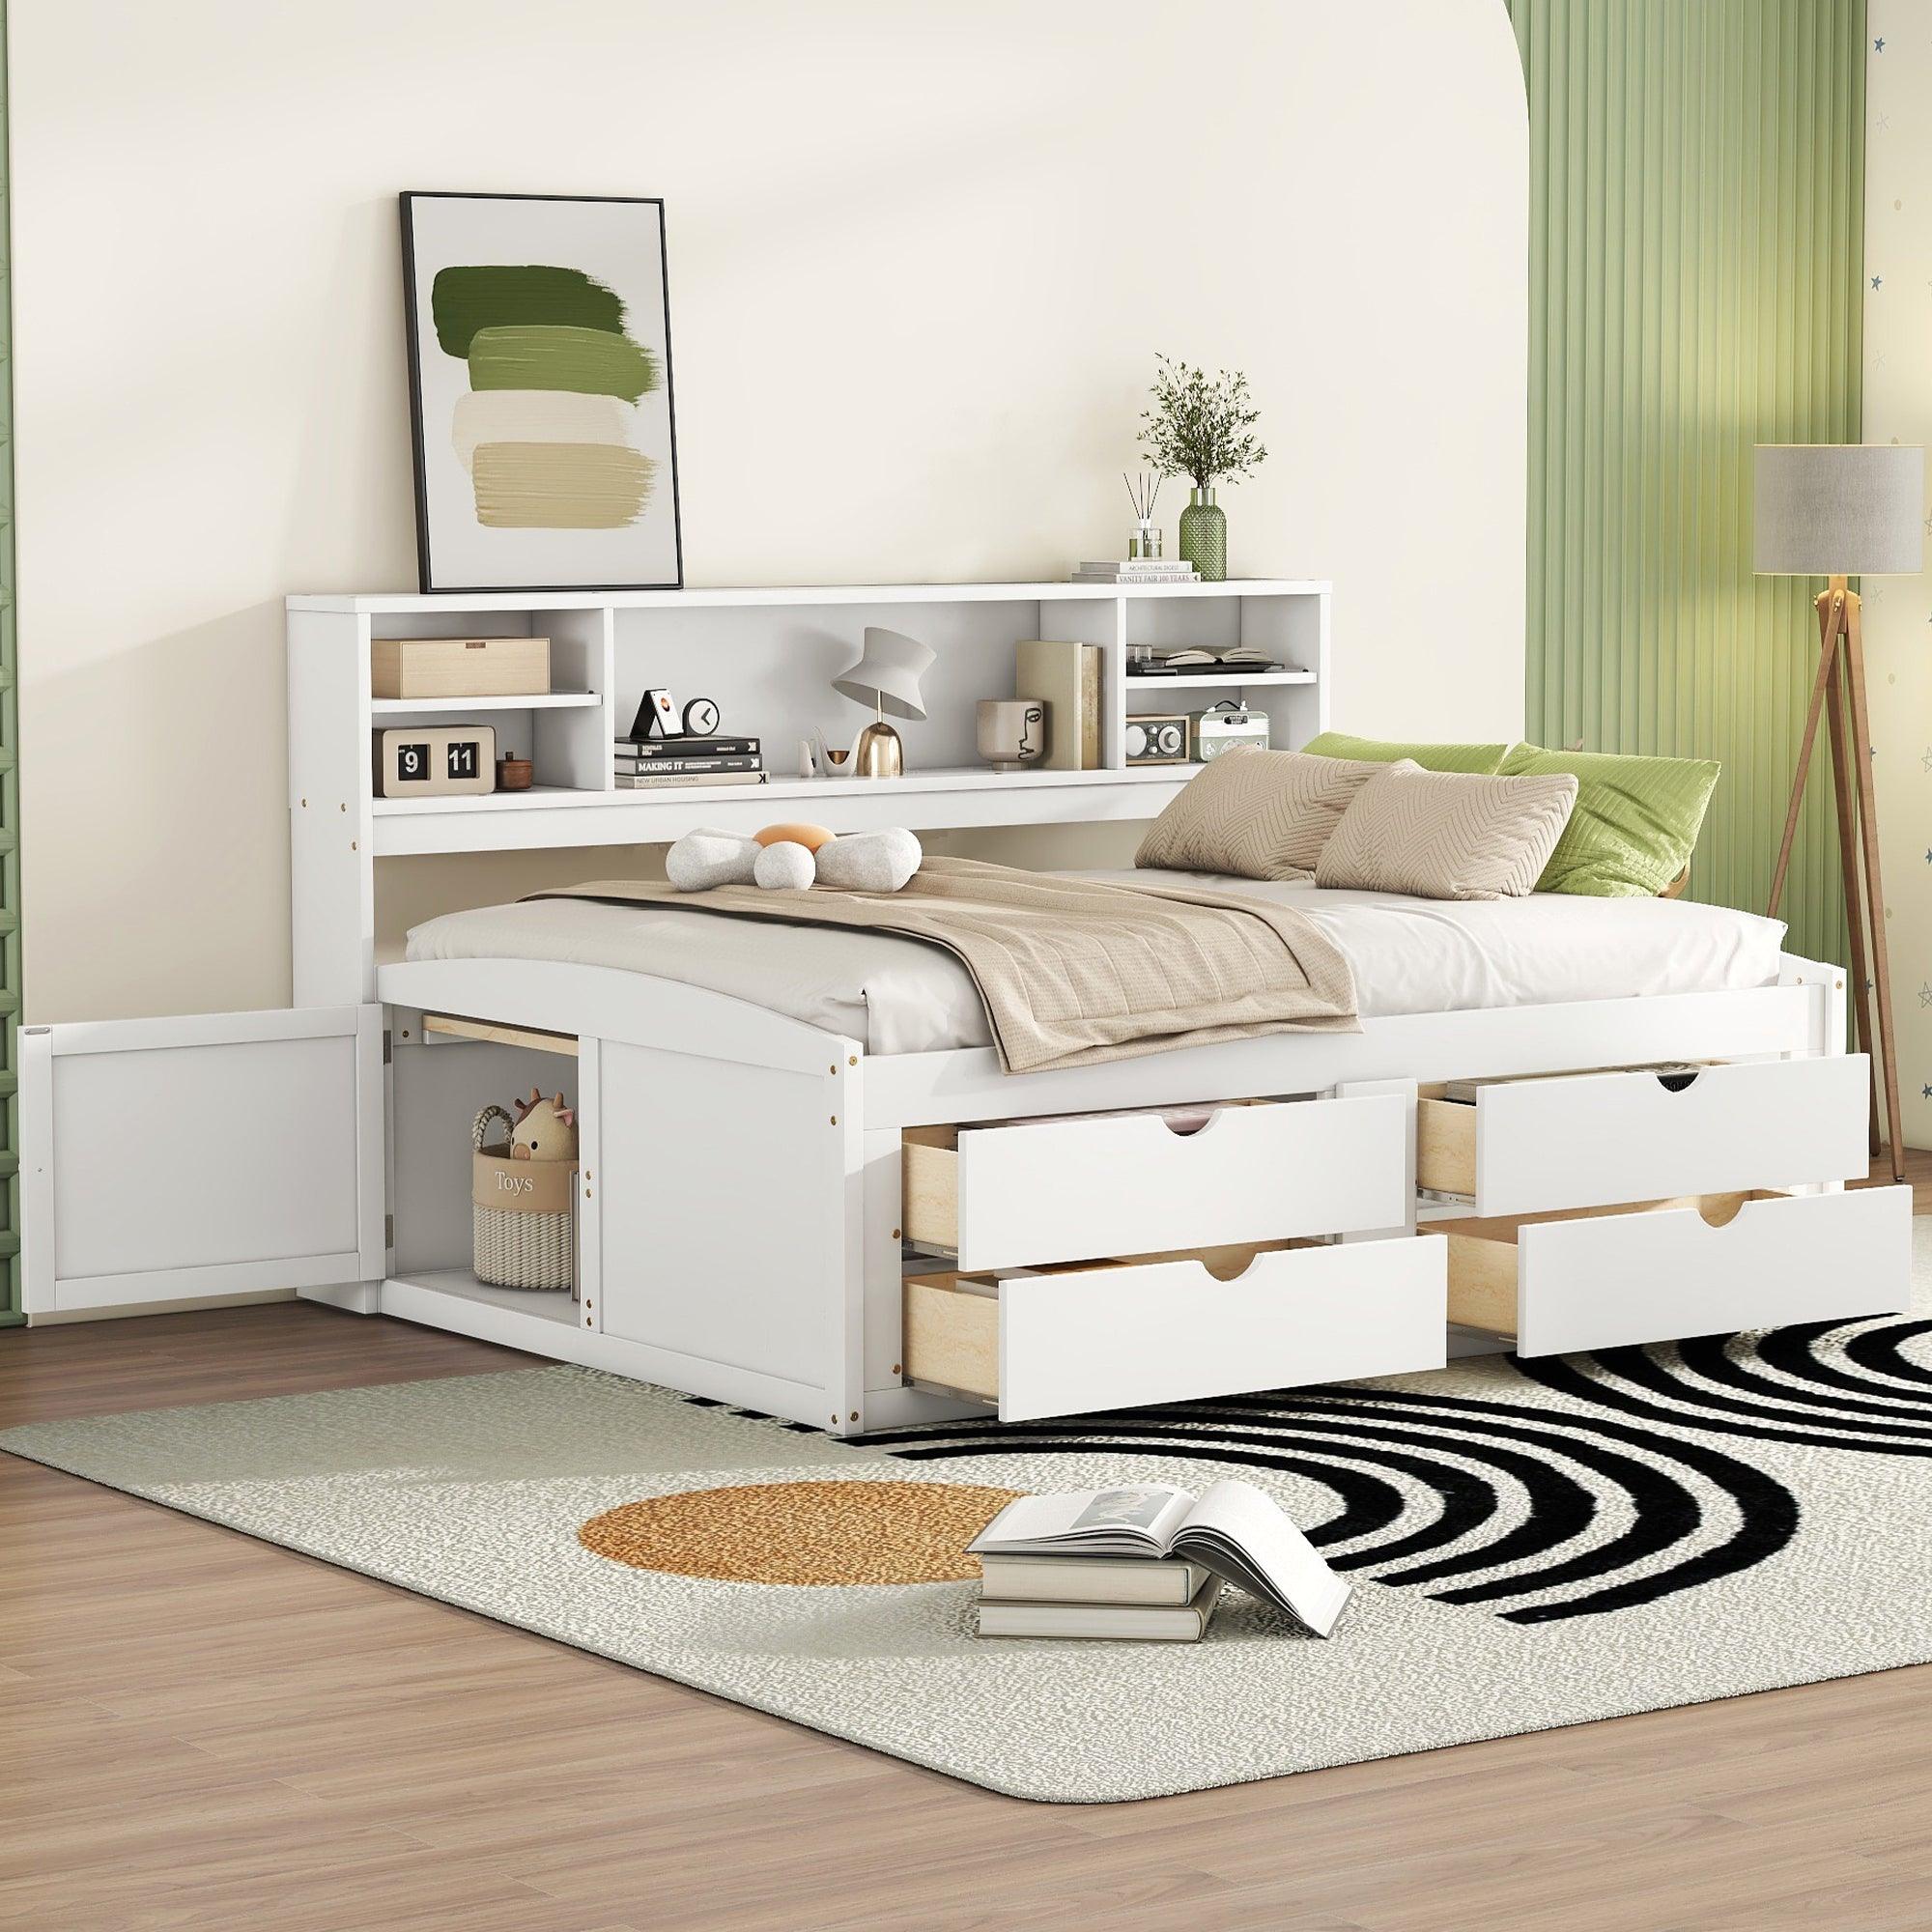 🆓🚛 Full Size Wood Daybed With 2 Bedside Cabinets, Upper Shelves & 4 Drawers, White